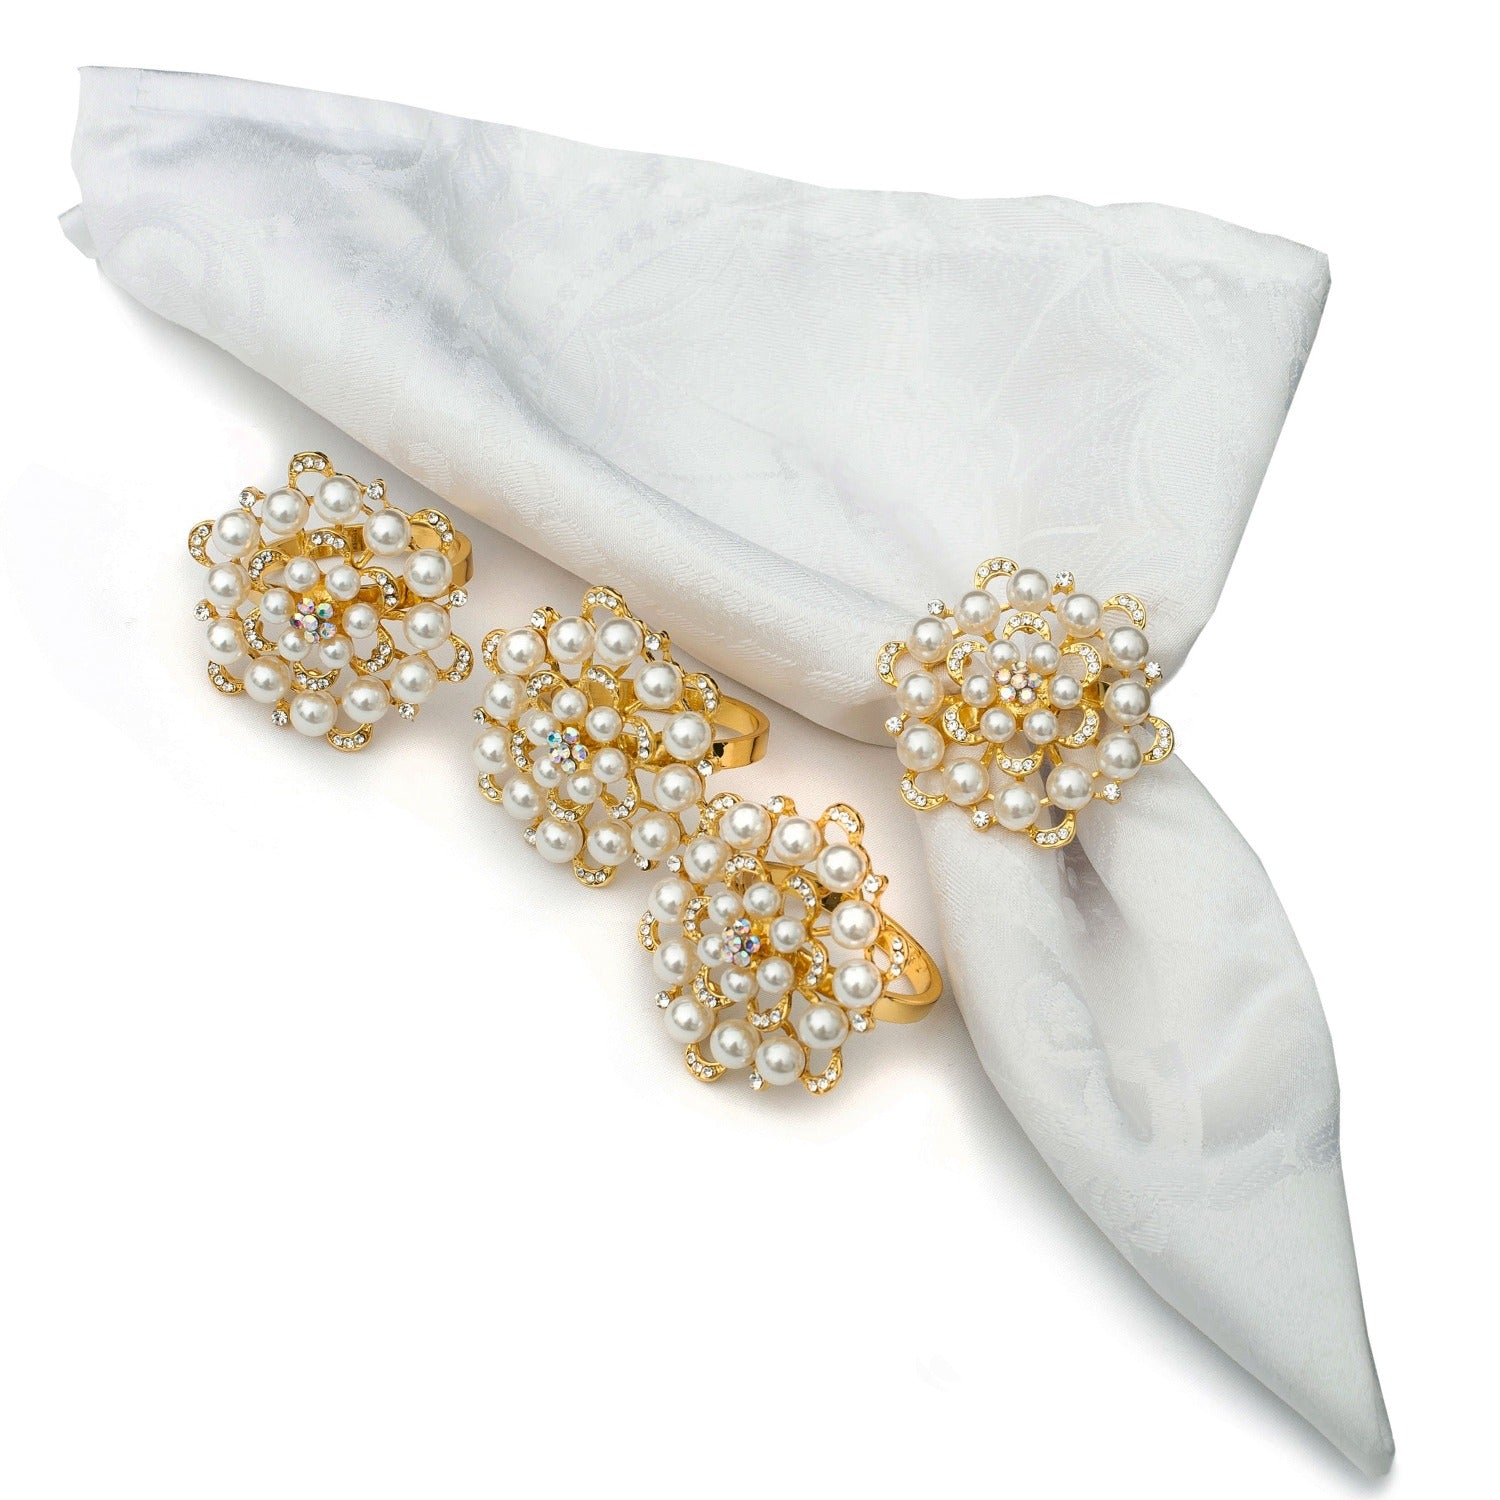 competitive prices pearl handmade napkin ring| Alibaba.com